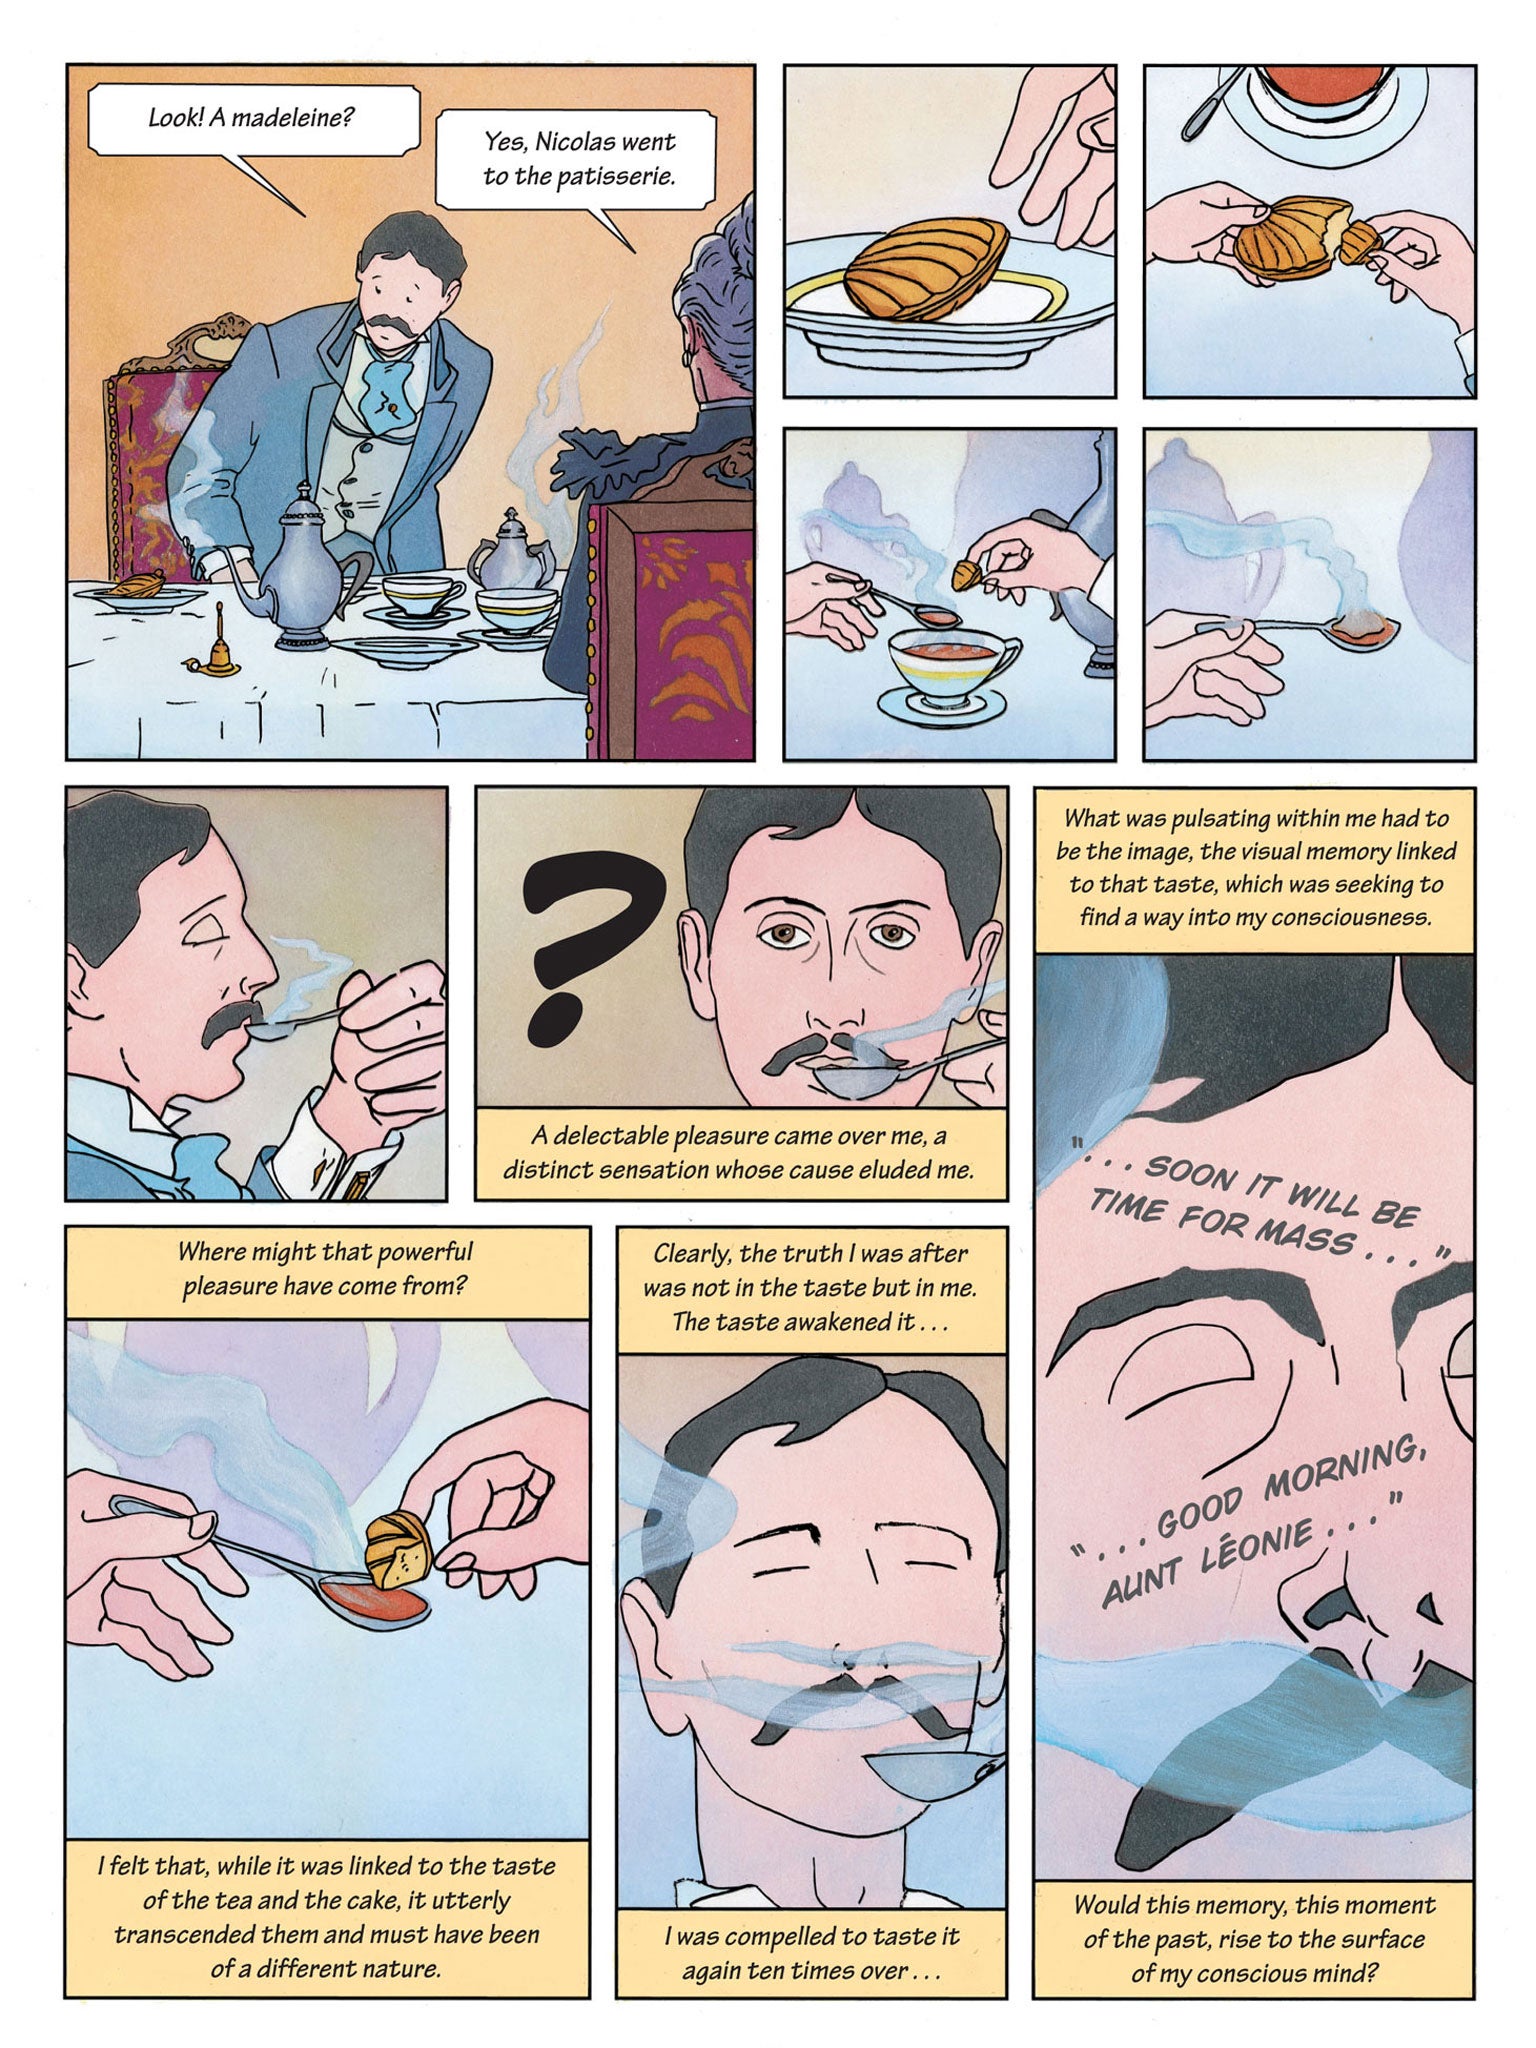 Memories: a tea-soaked madeleine helps the narrator to relive the past in the graphic version of Proust’s classic work